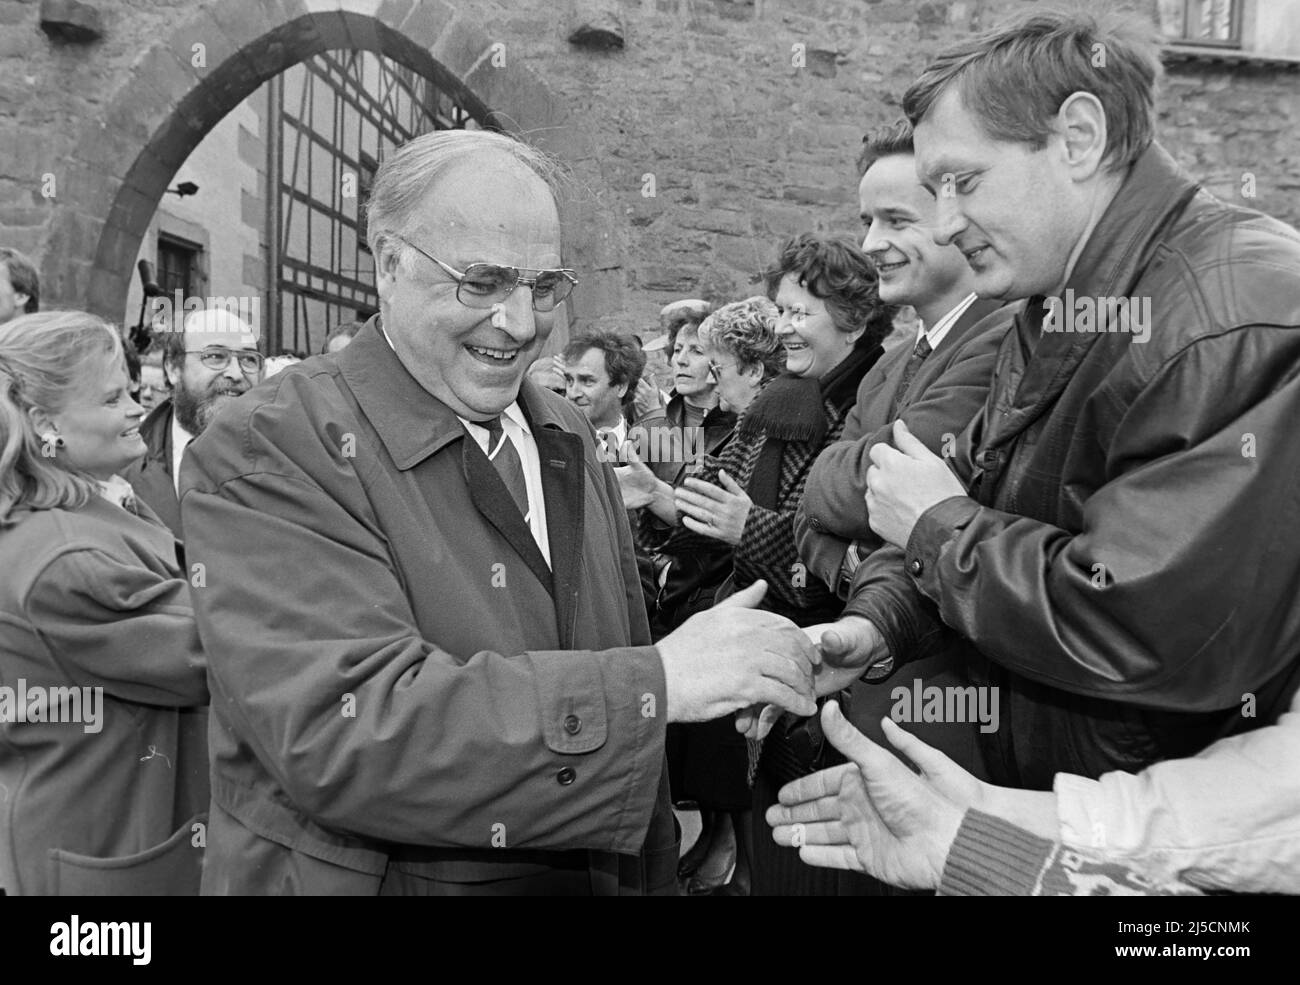 Erfurt, DEU, 08.04.1991 - Chancellor Helmut Kohl and his wife Hannelore bathing in the crowd in Erfurt. [automated translation] Stock Photo